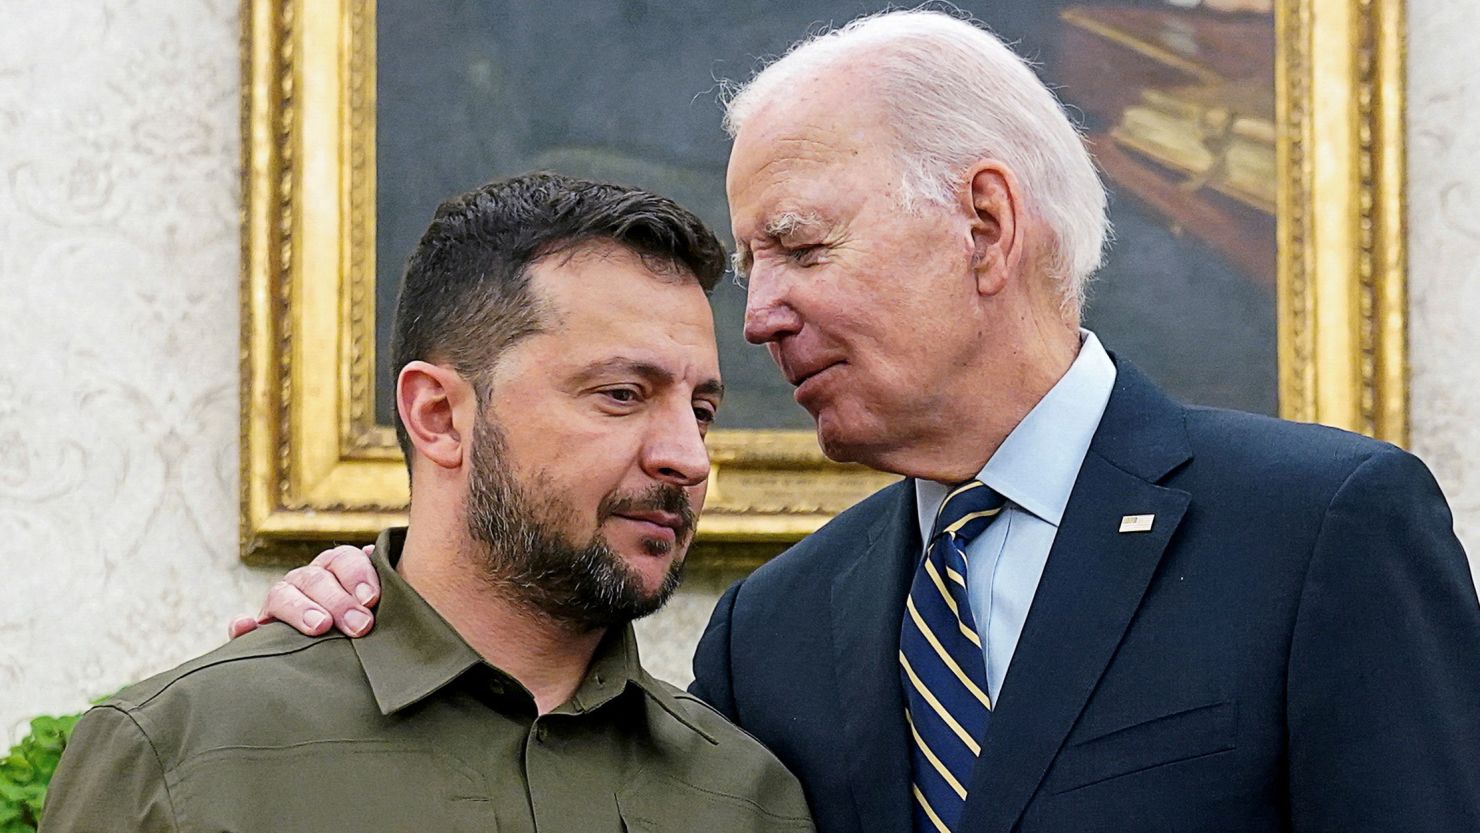 Ukrainian President Volodymyr Zelenskiy is embraced by U.S. President Joe Biden in the Oval Office of the White House in Washington, September 21, 2023. REUTERS/Kevin Lamarque     TPX IMAGES OF THE DAY